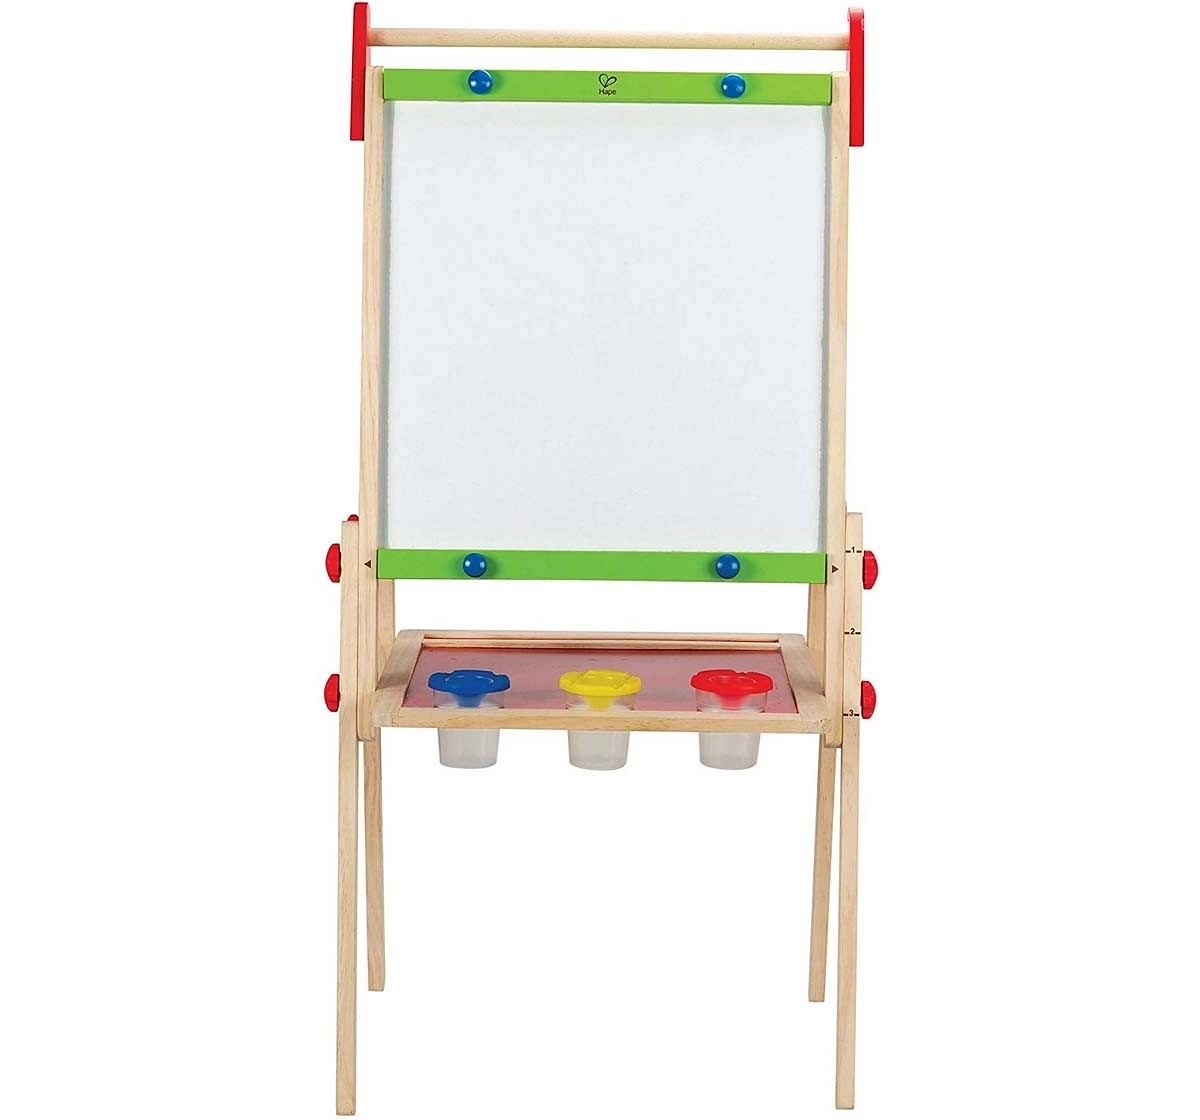 Hape Early Explorer All In 1 Easel - 6 Pieces Activity Table & Boards for Kids age 3Y+ 